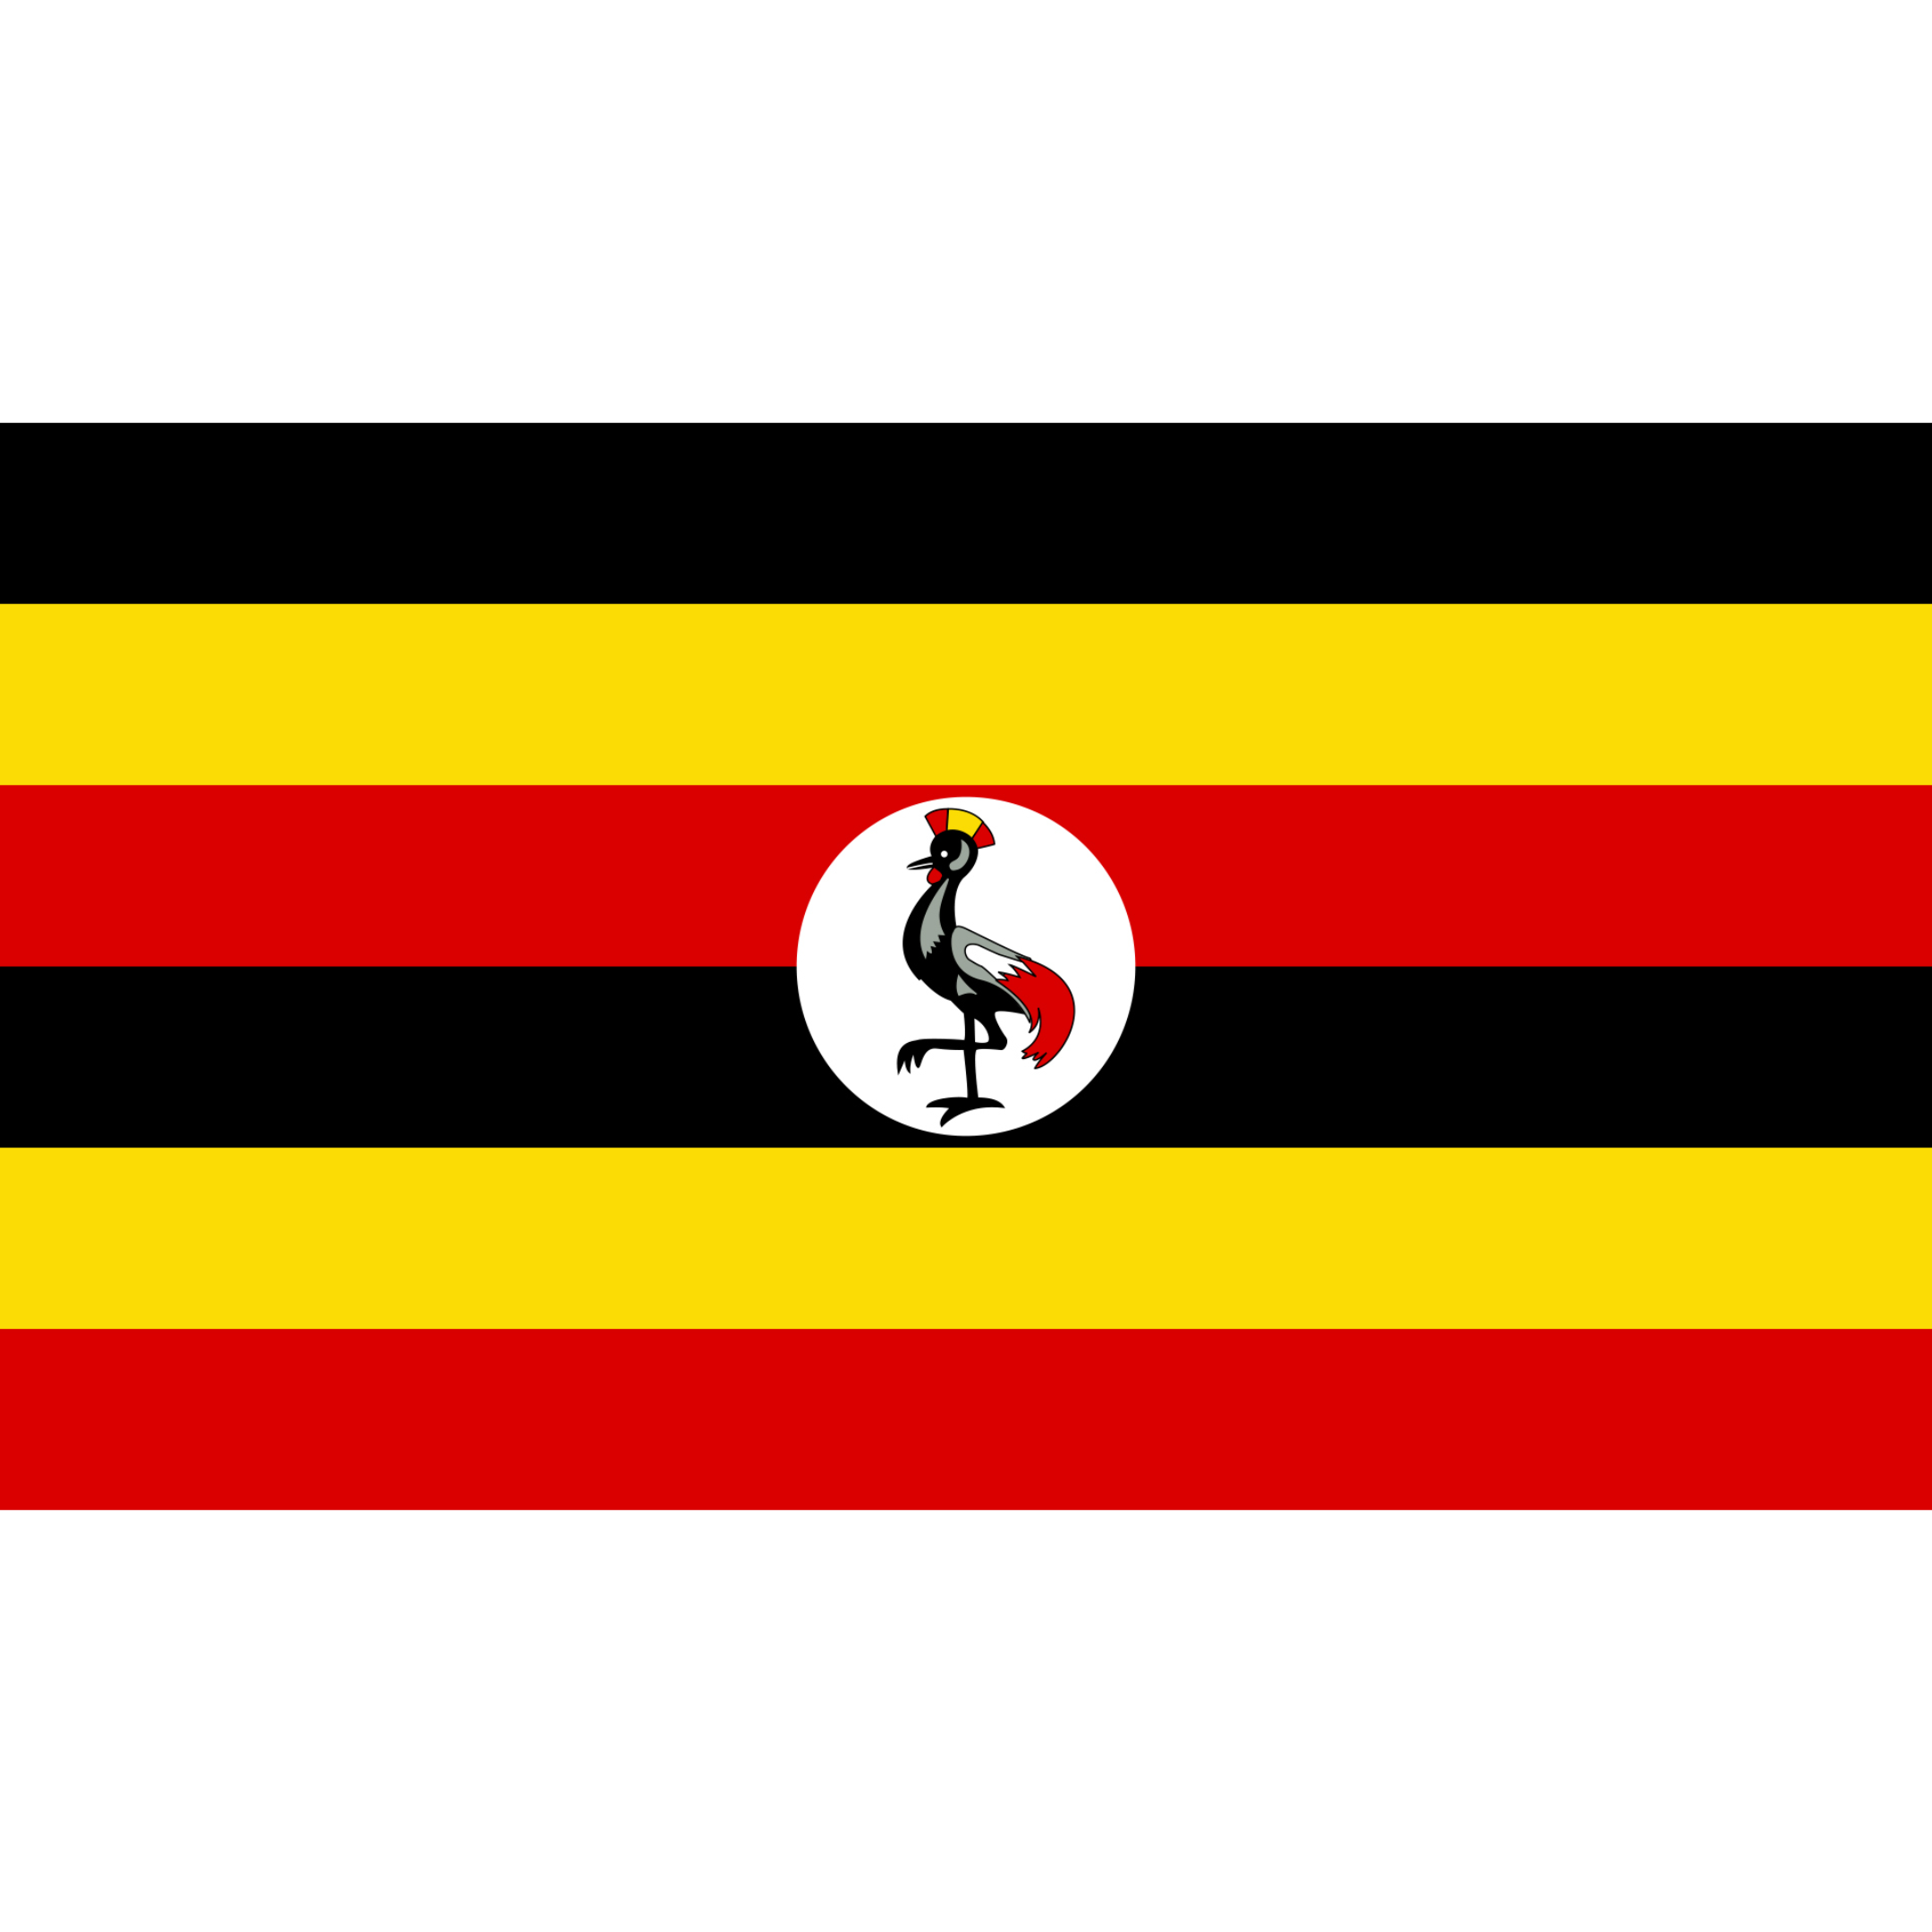 The flag of Uganda has 6 horizontal bands in black, yellow, red, black, yellow and red with a white circle containing a bird.